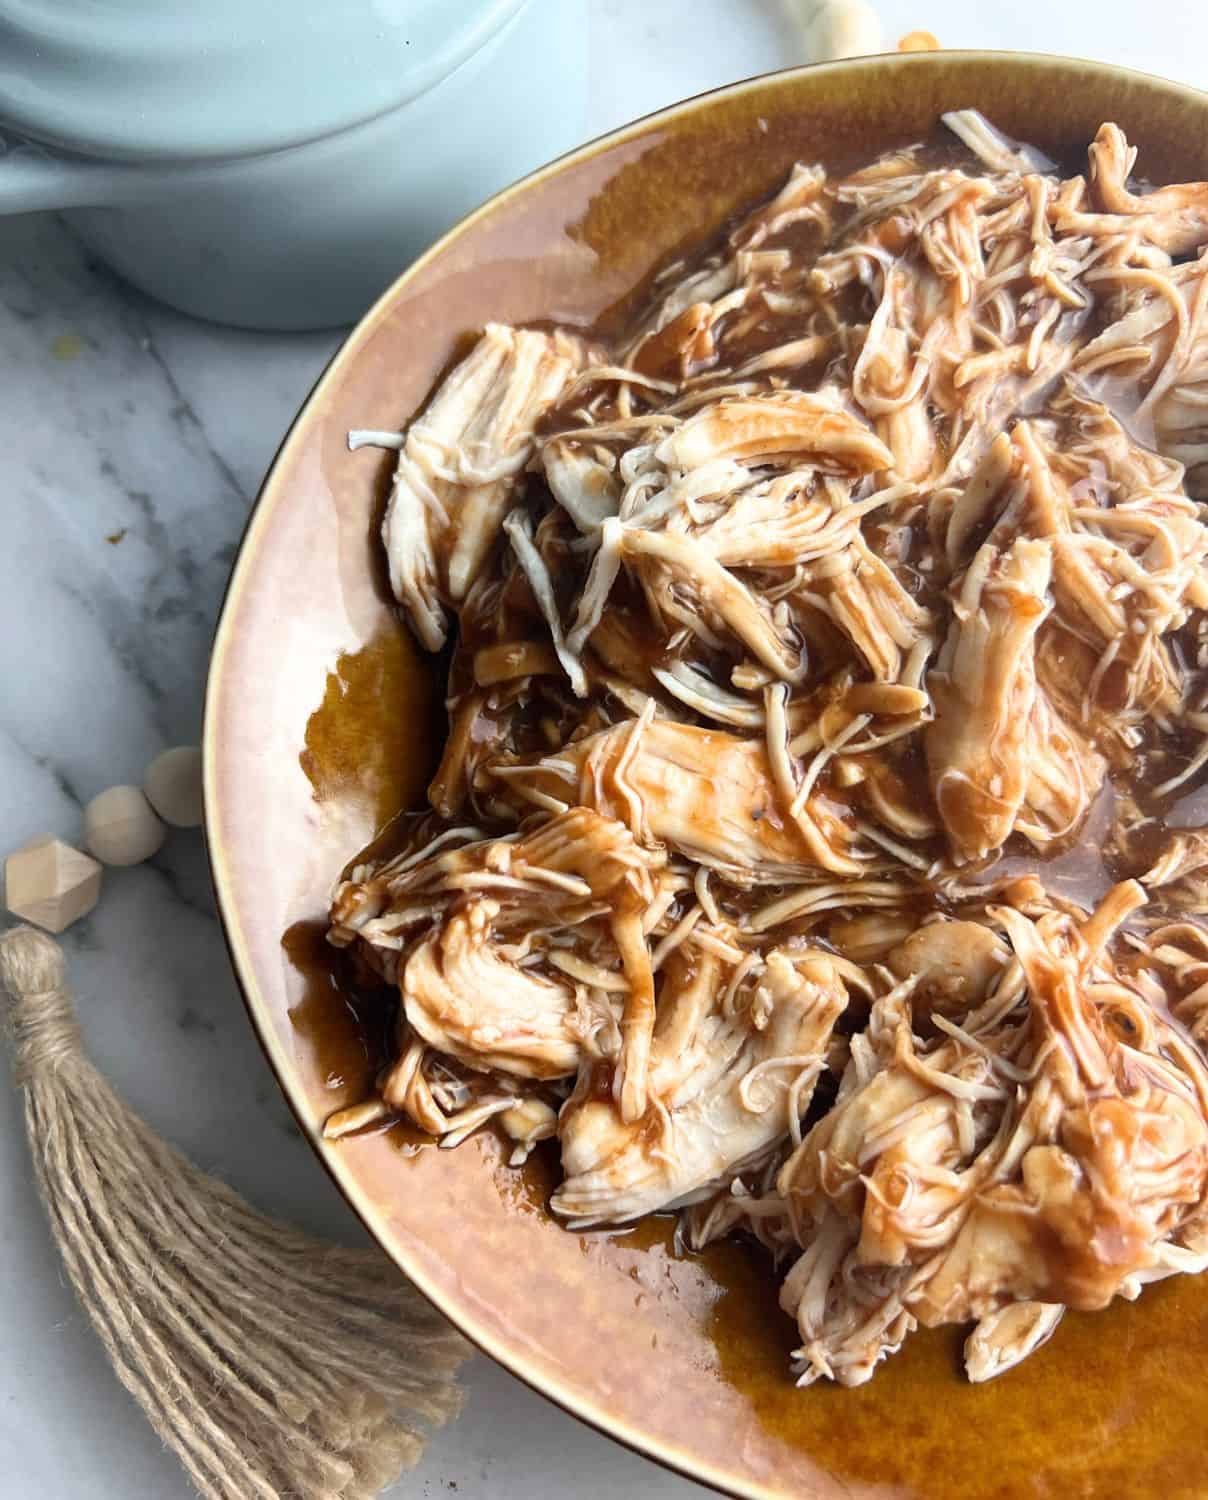 Shredded chicken with bbq sauce in a brown bowl. 